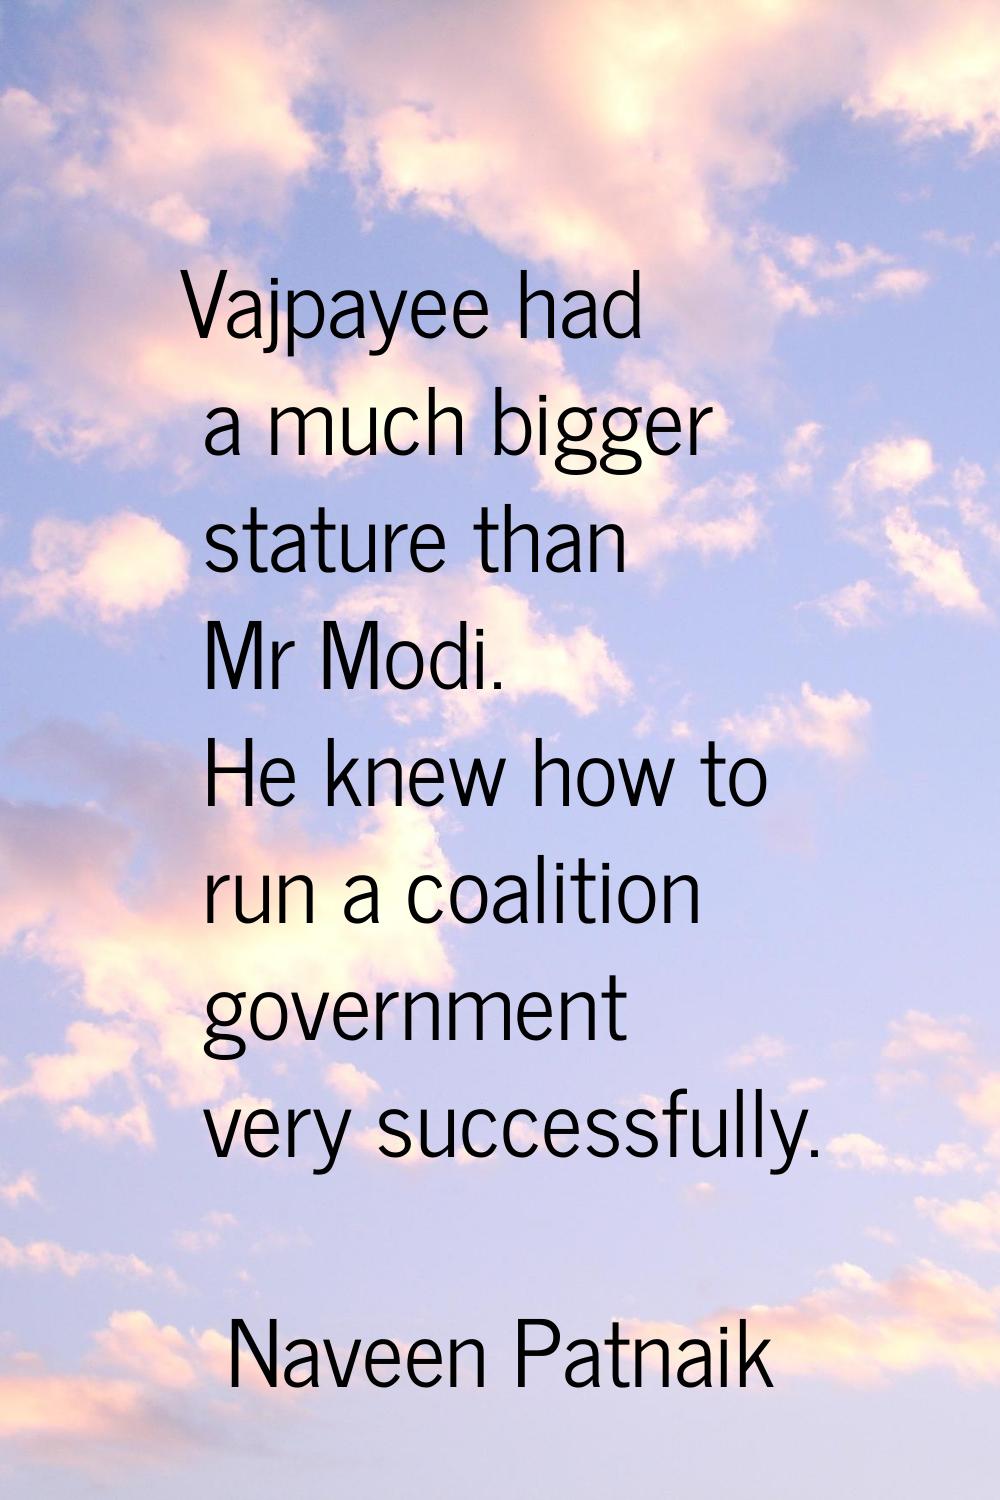 Vajpayee had a much bigger stature than Mr Modi. He knew how to run a coalition government very suc